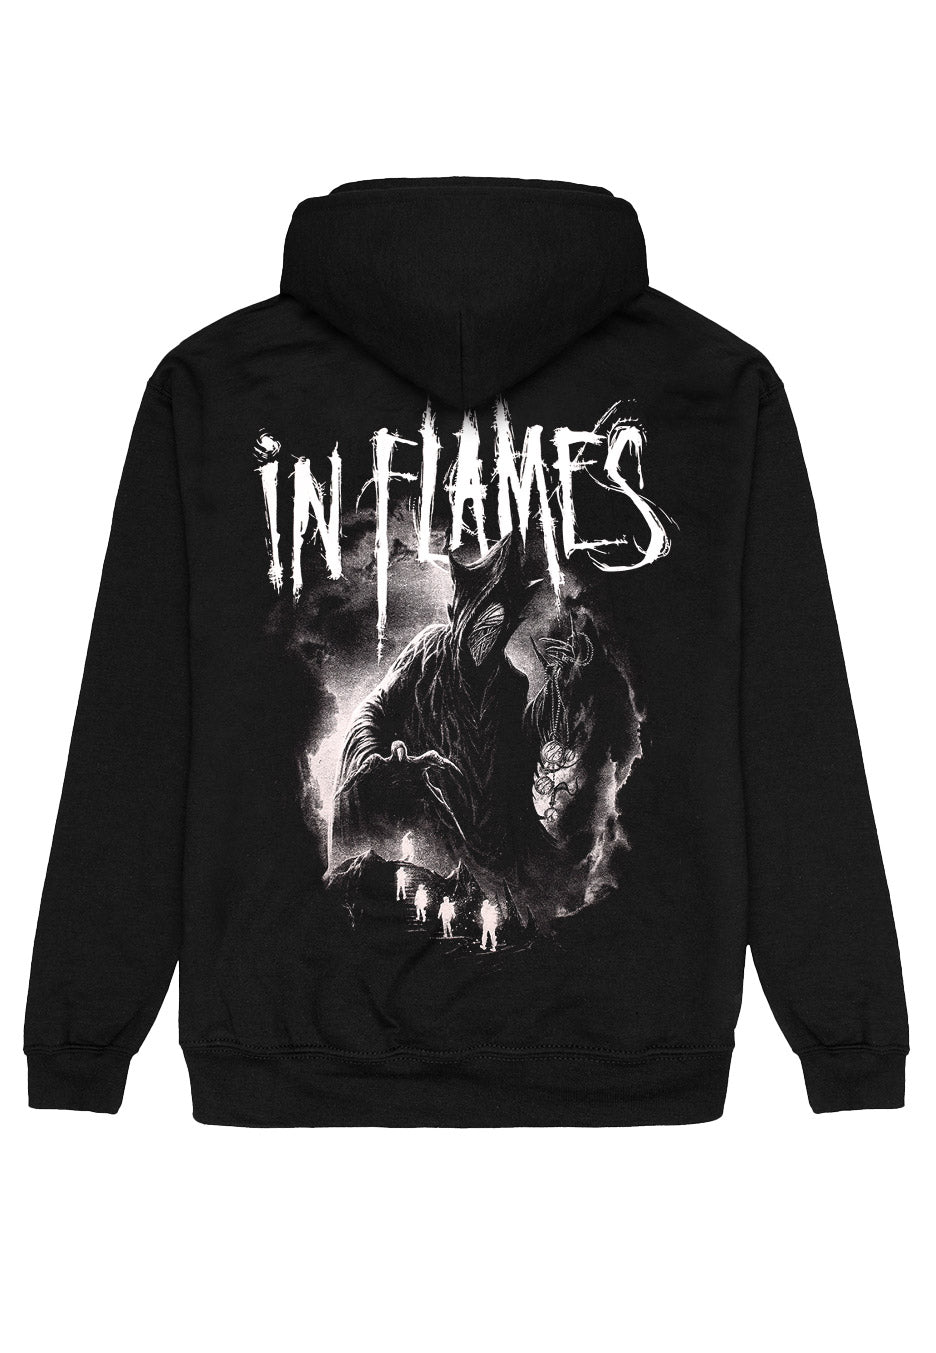 In Flames - Foregone Cover - Zipper